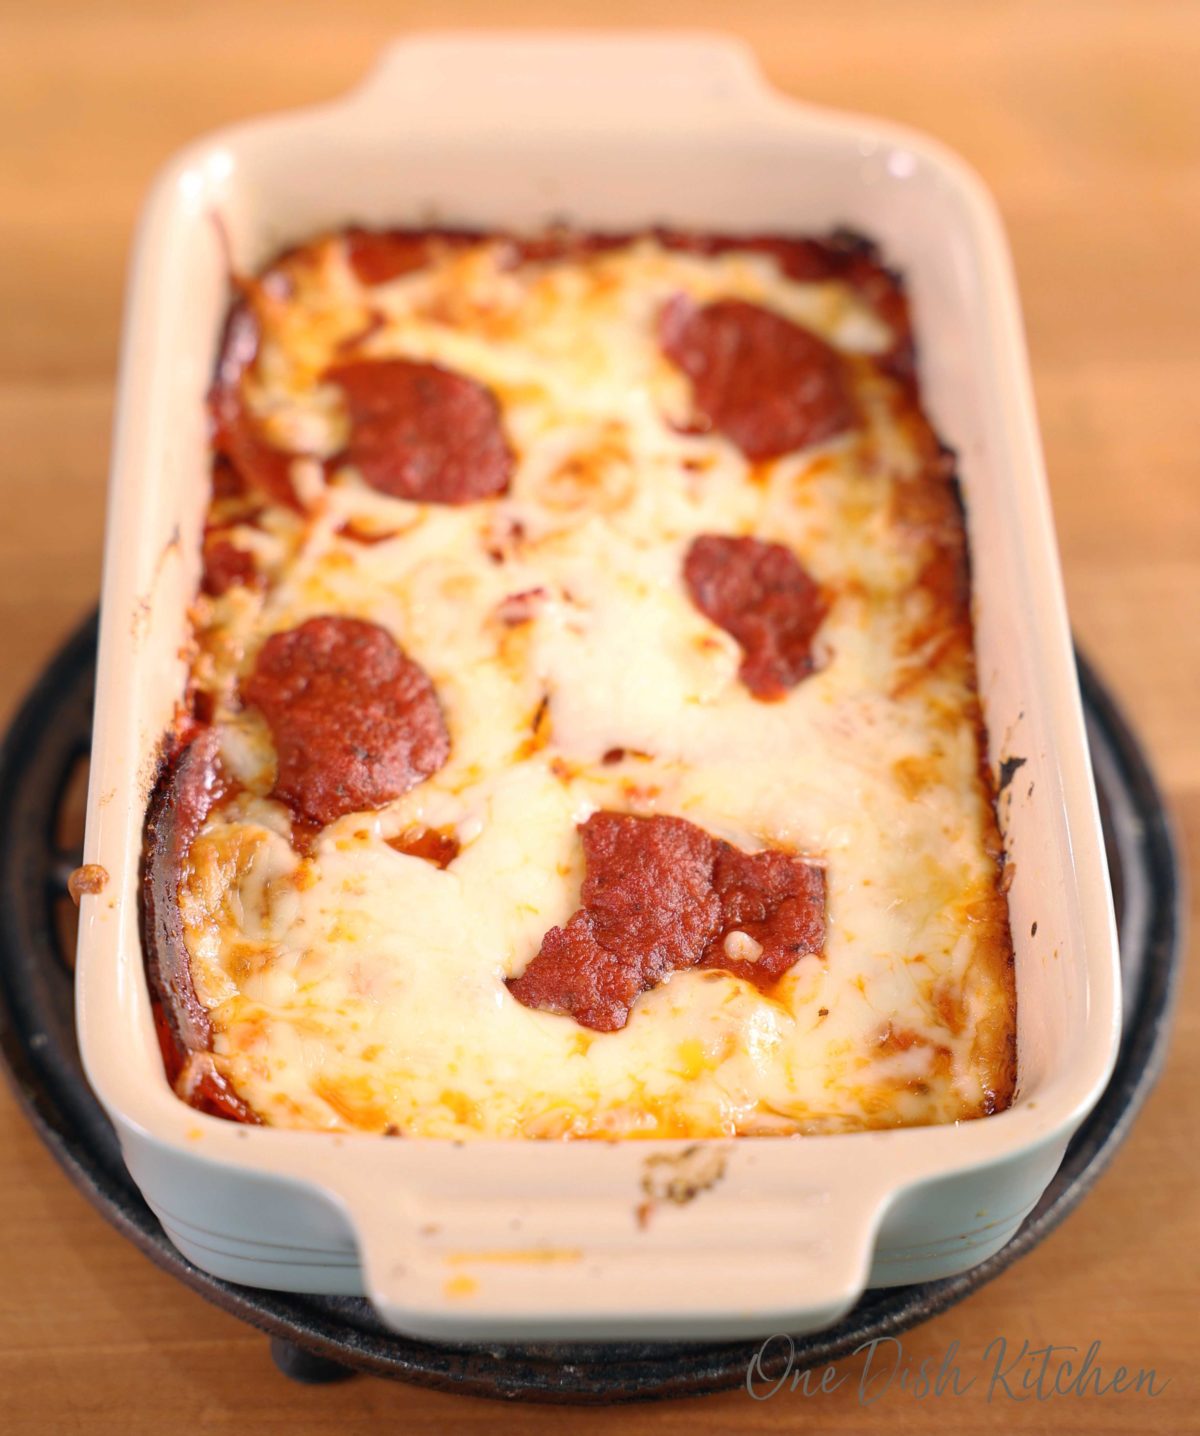 a small detroit style pizza in a blue rectangular baking dish